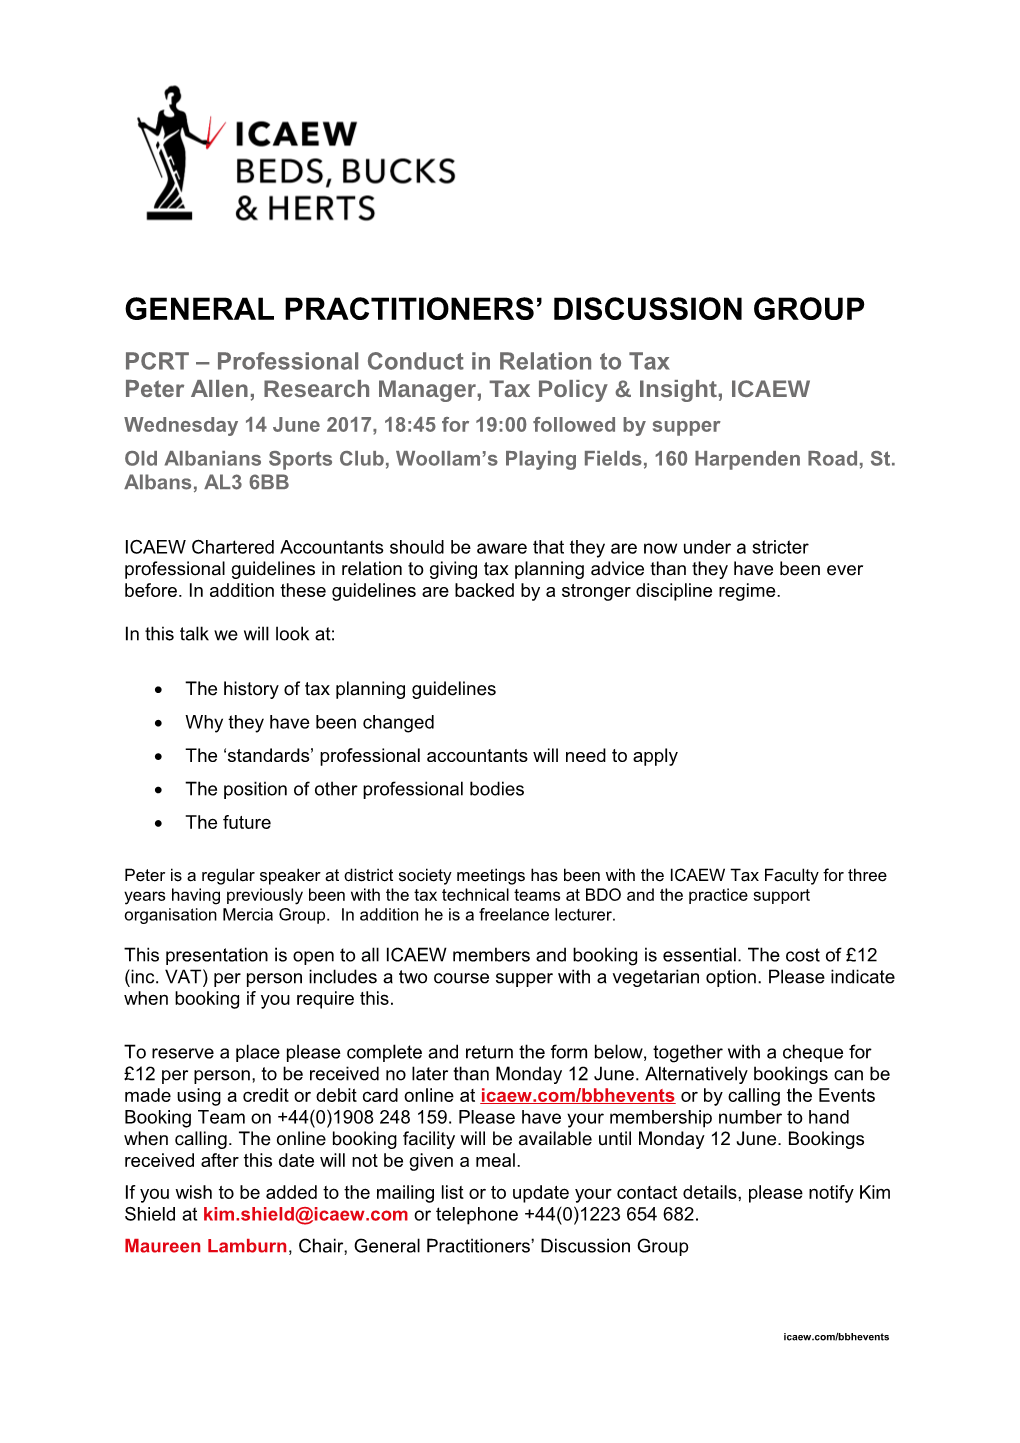 General Practitioners Discussion Group